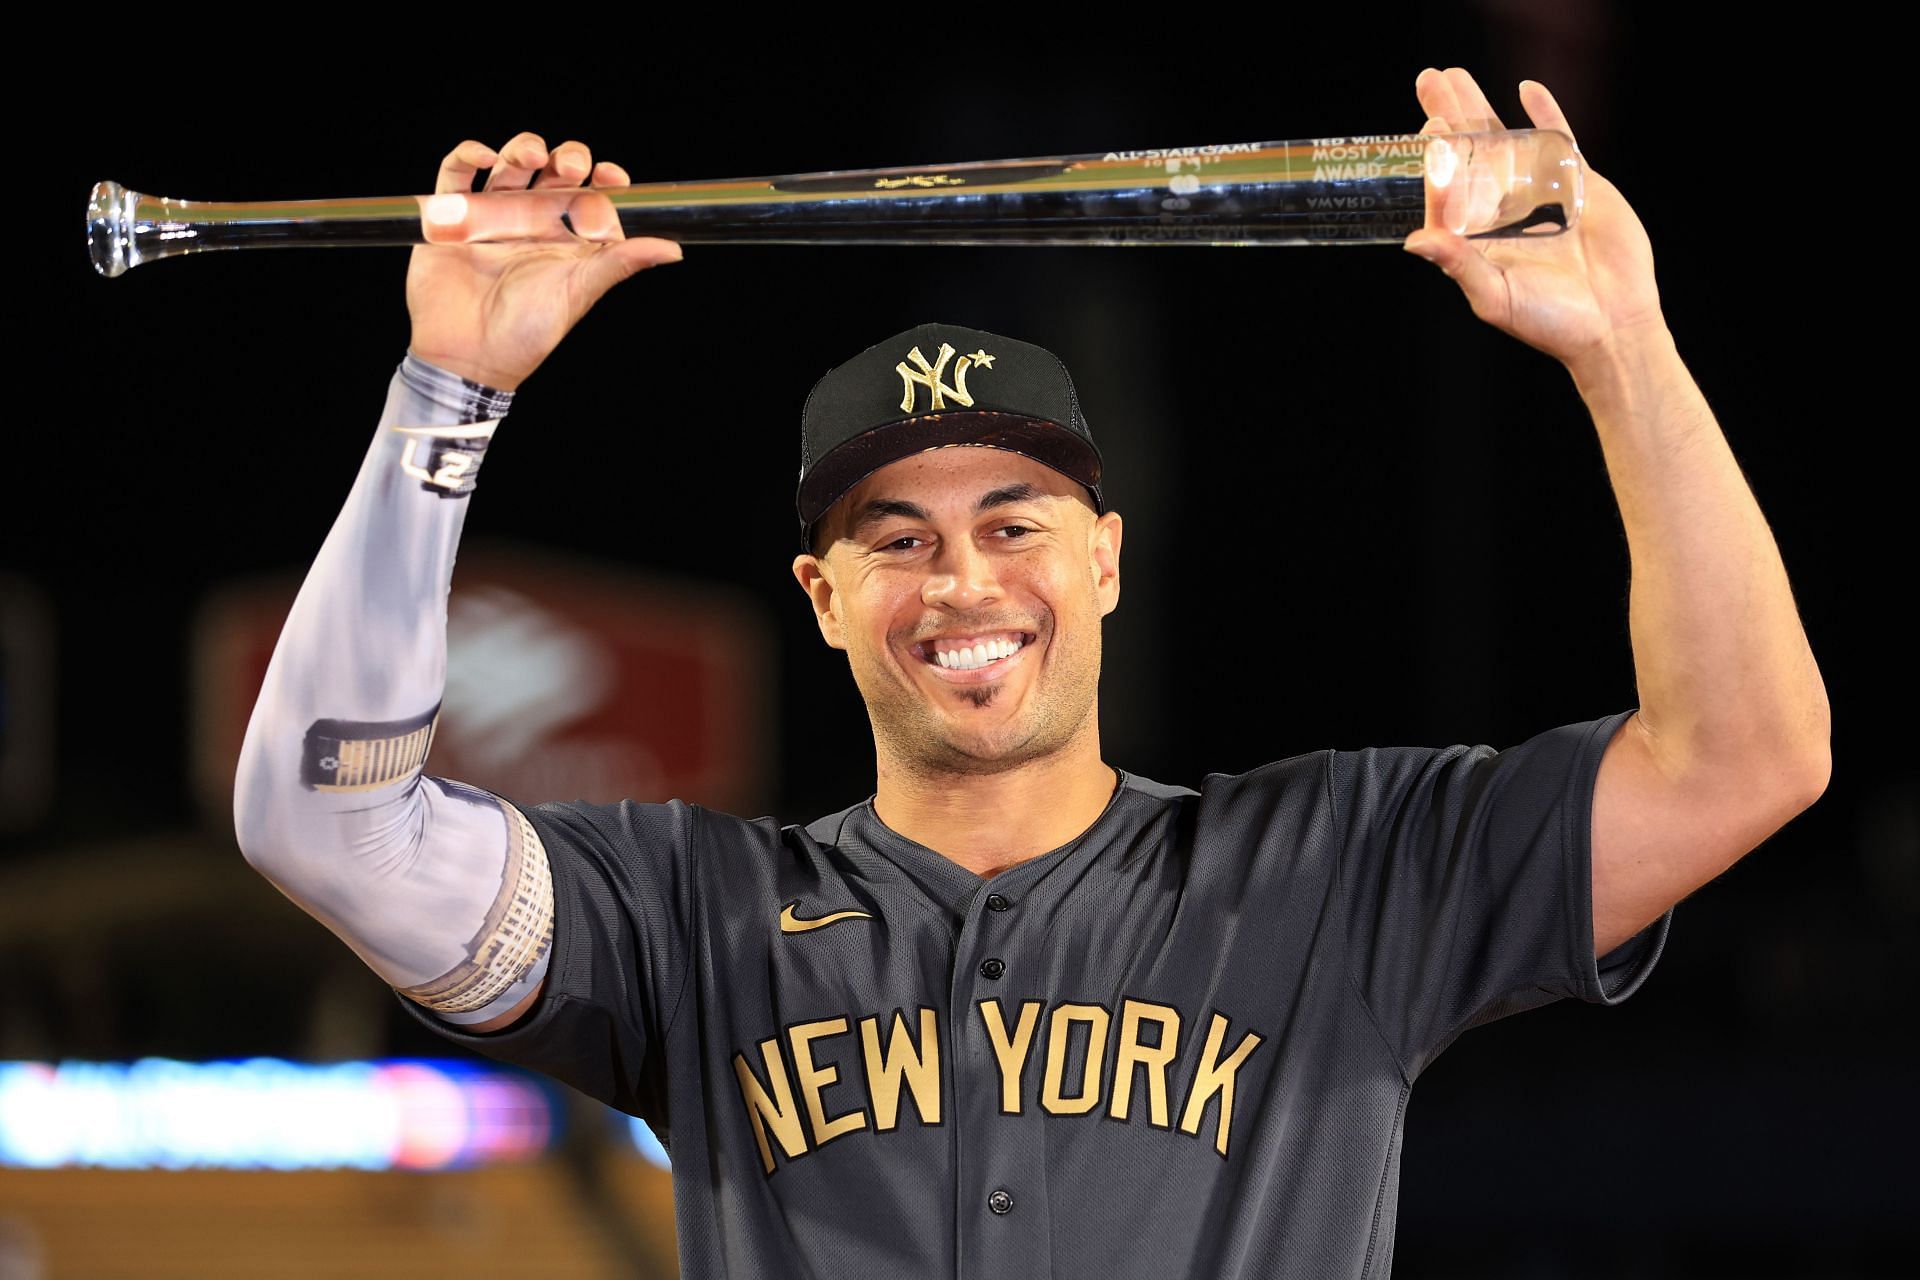 You can go backwards, you can run away, or you can stick it through - New  York Yankees slugger Giancarlo Stanton shares message on overcoming  adversity after being named All-Star Game MVP